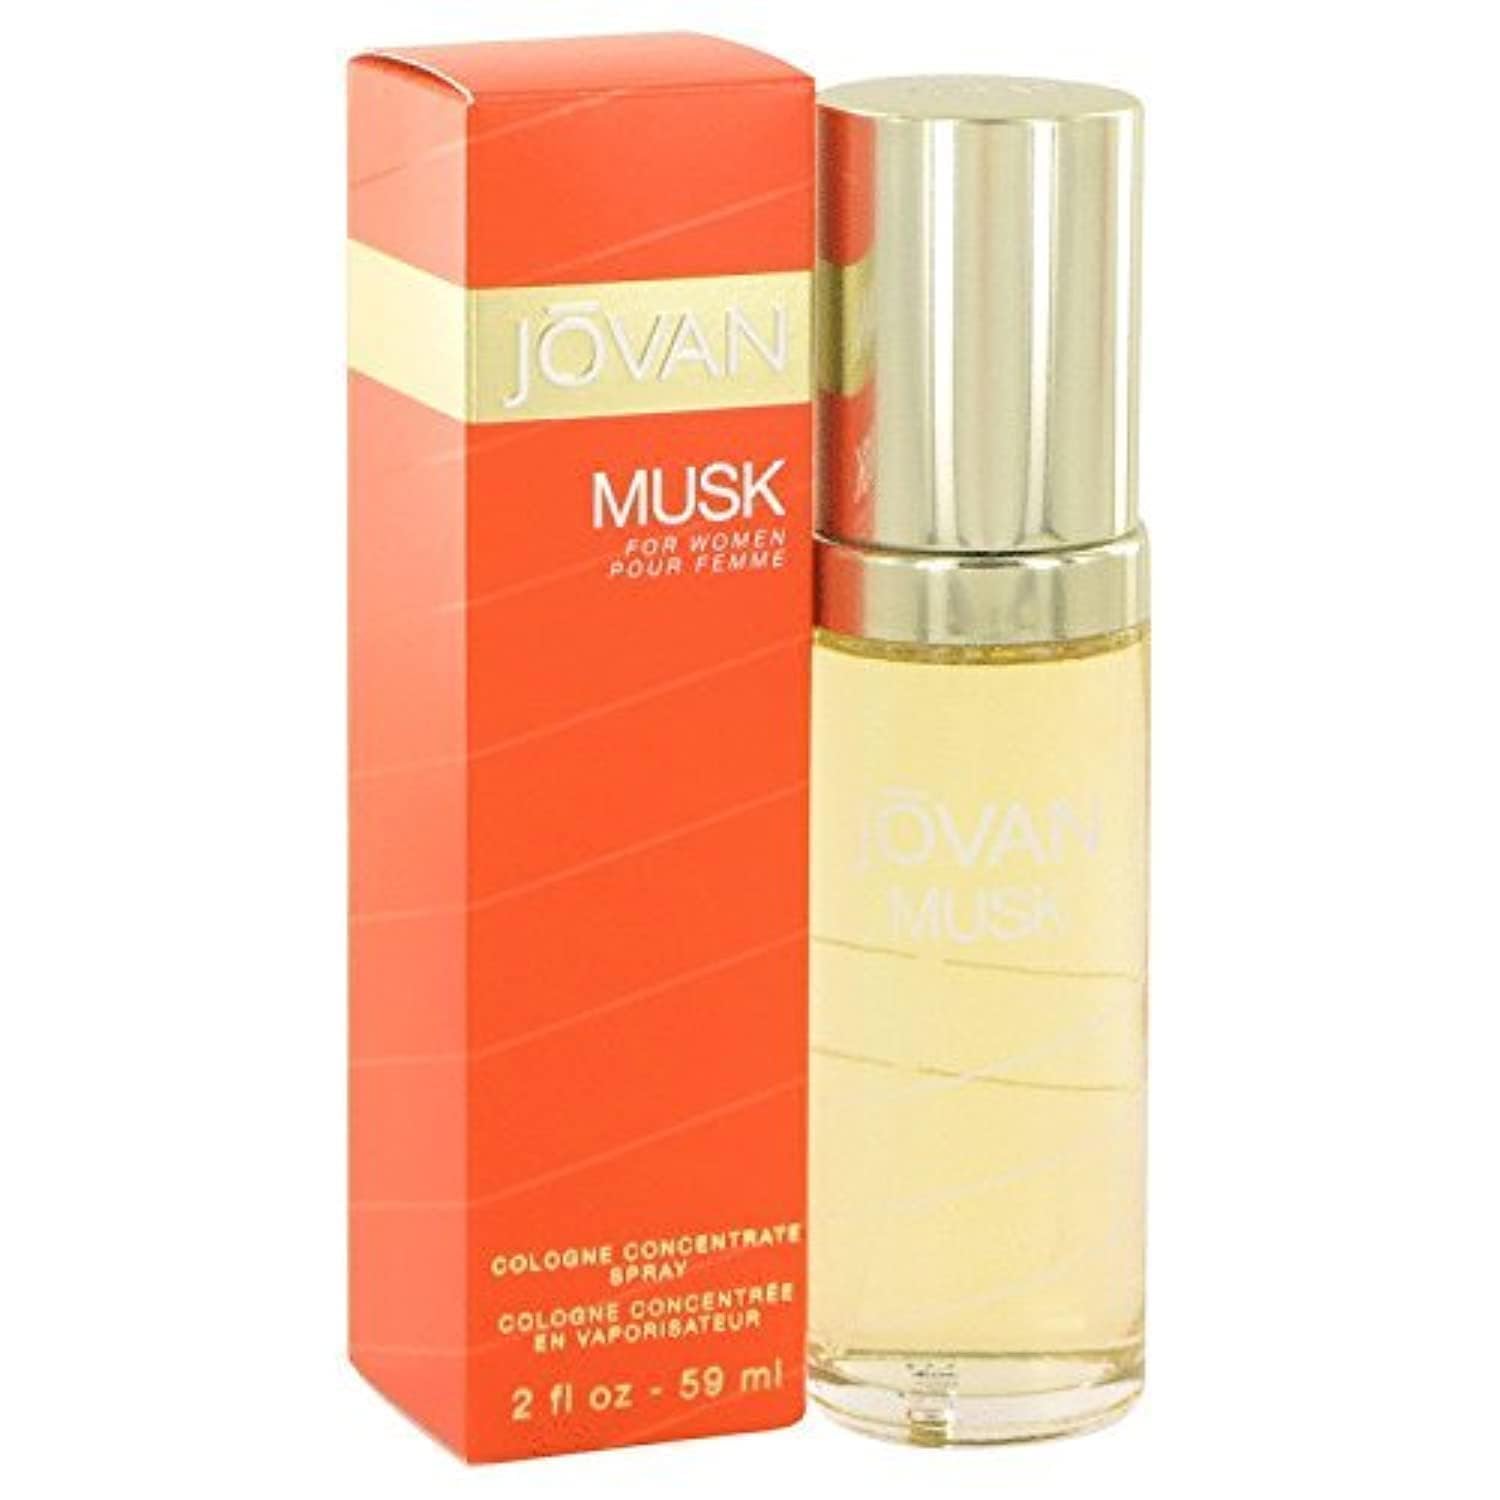 Jovan Musk By Jovan Cologne Concentrate …